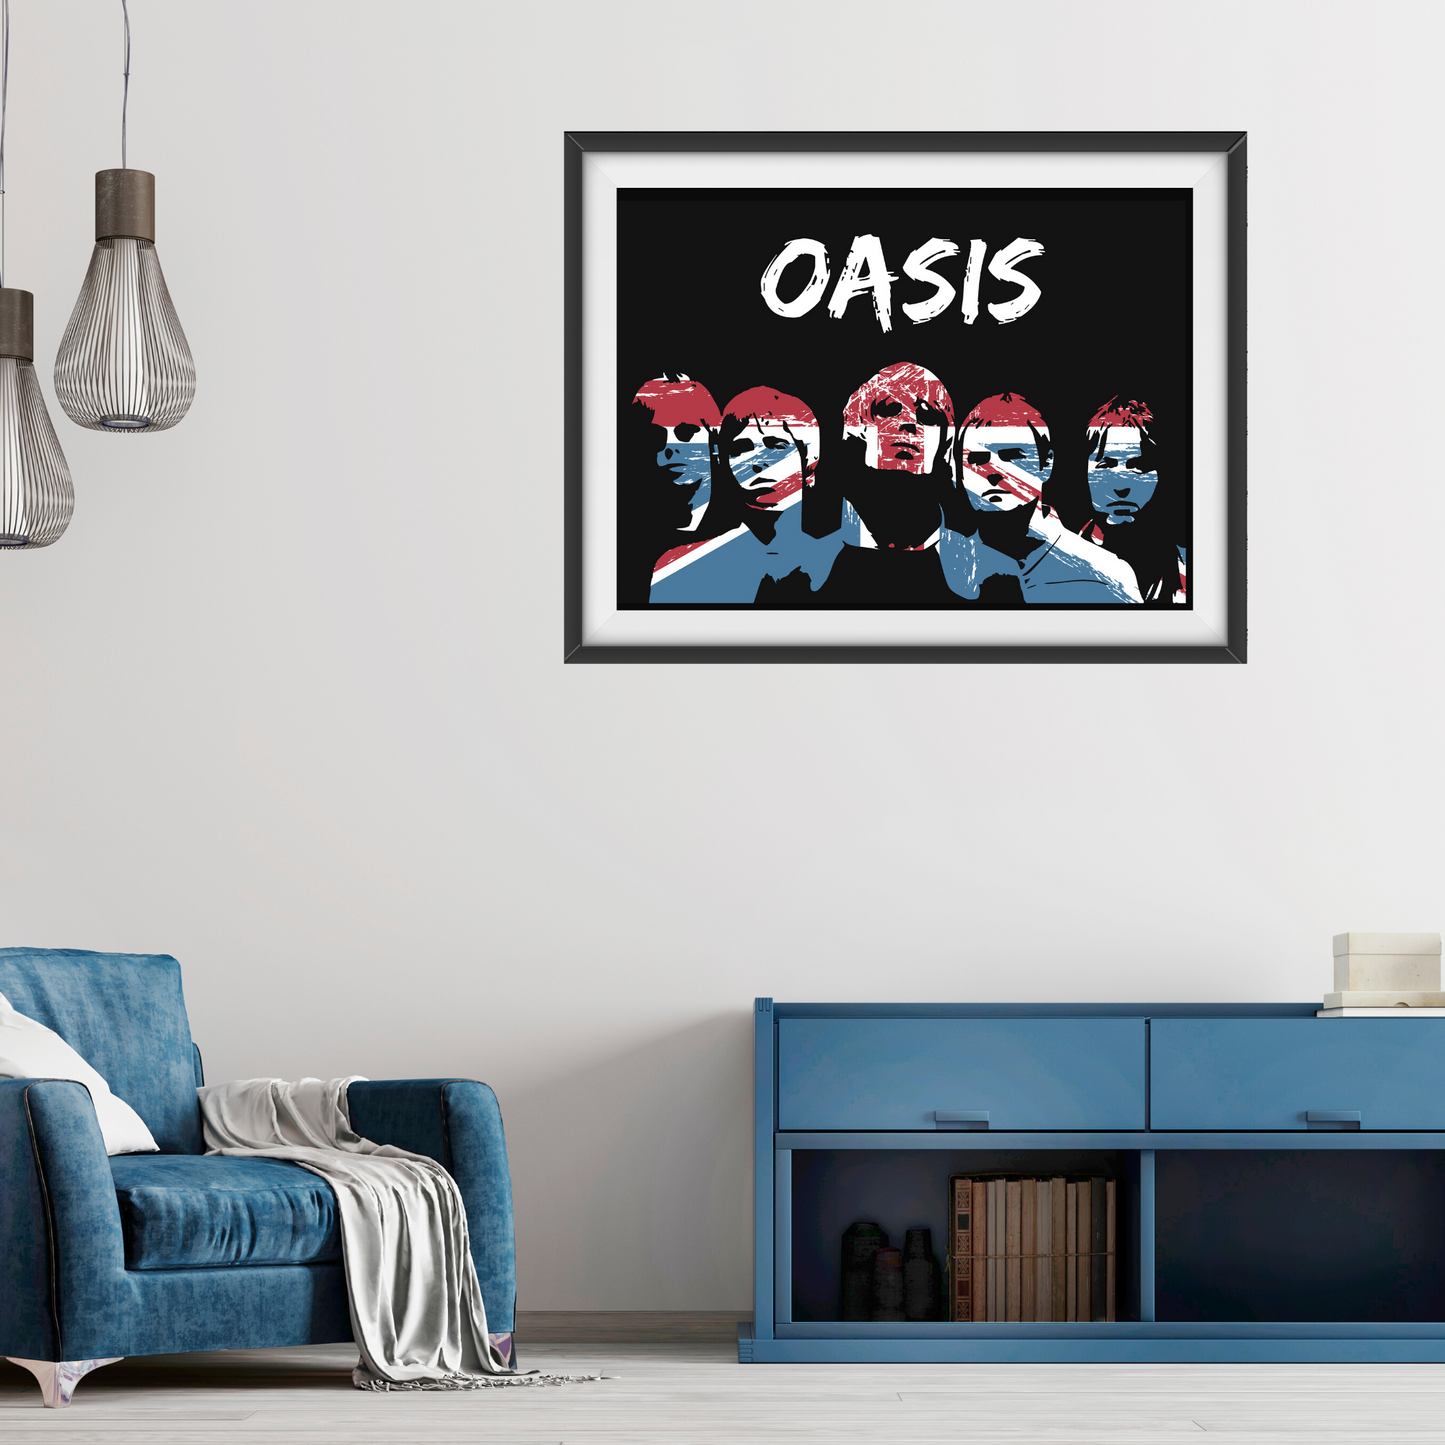 Oasis v4 Minimalist poster in songs Memorabilia/Collectible/Print